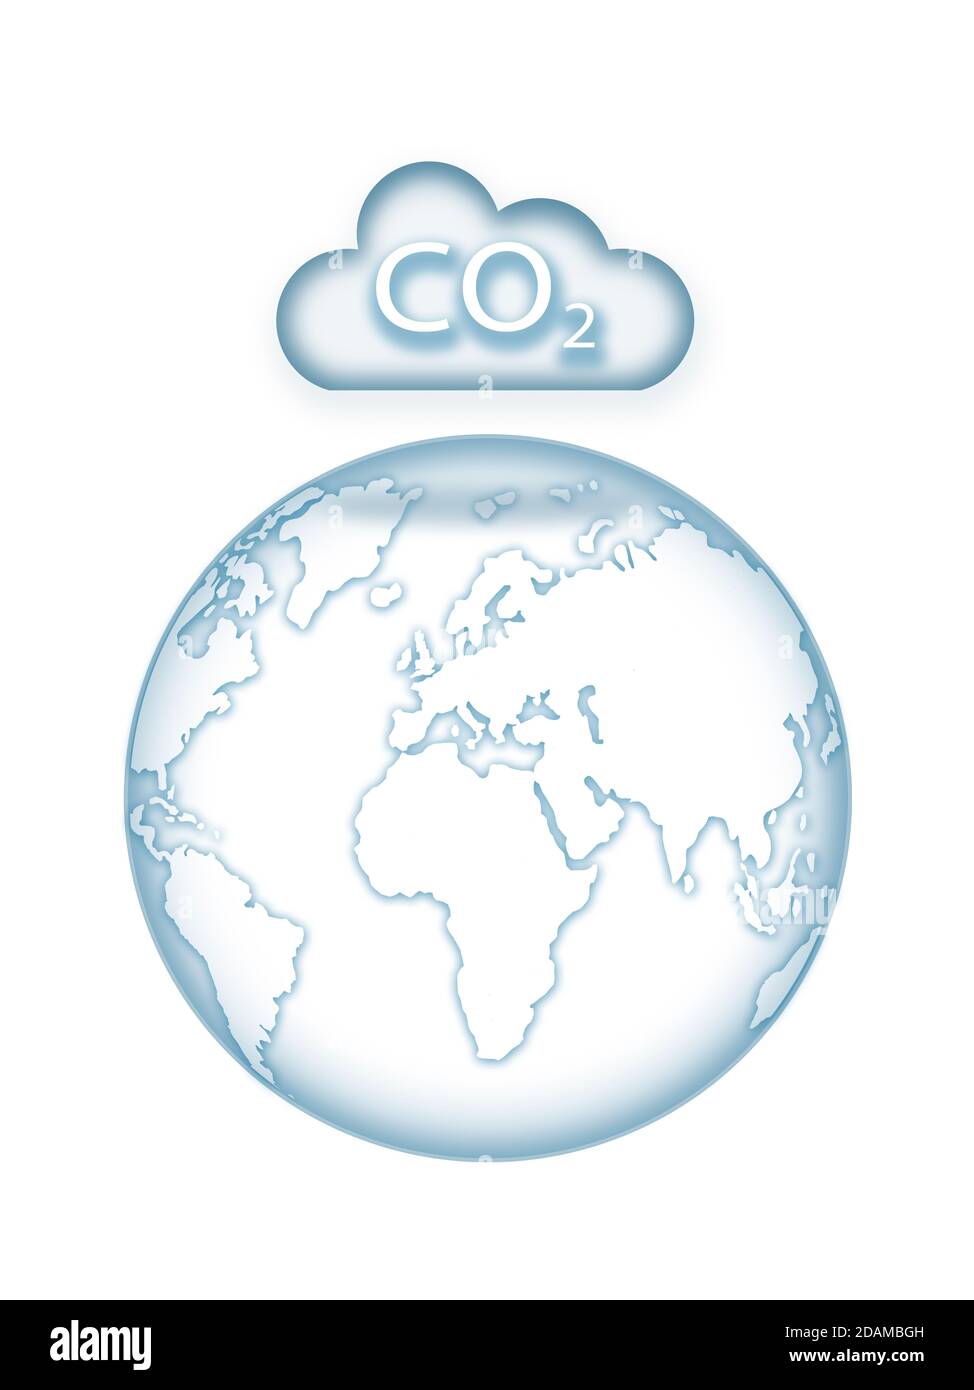 Earth in the shadow of a carbon cloud, illustration. Stock Photo